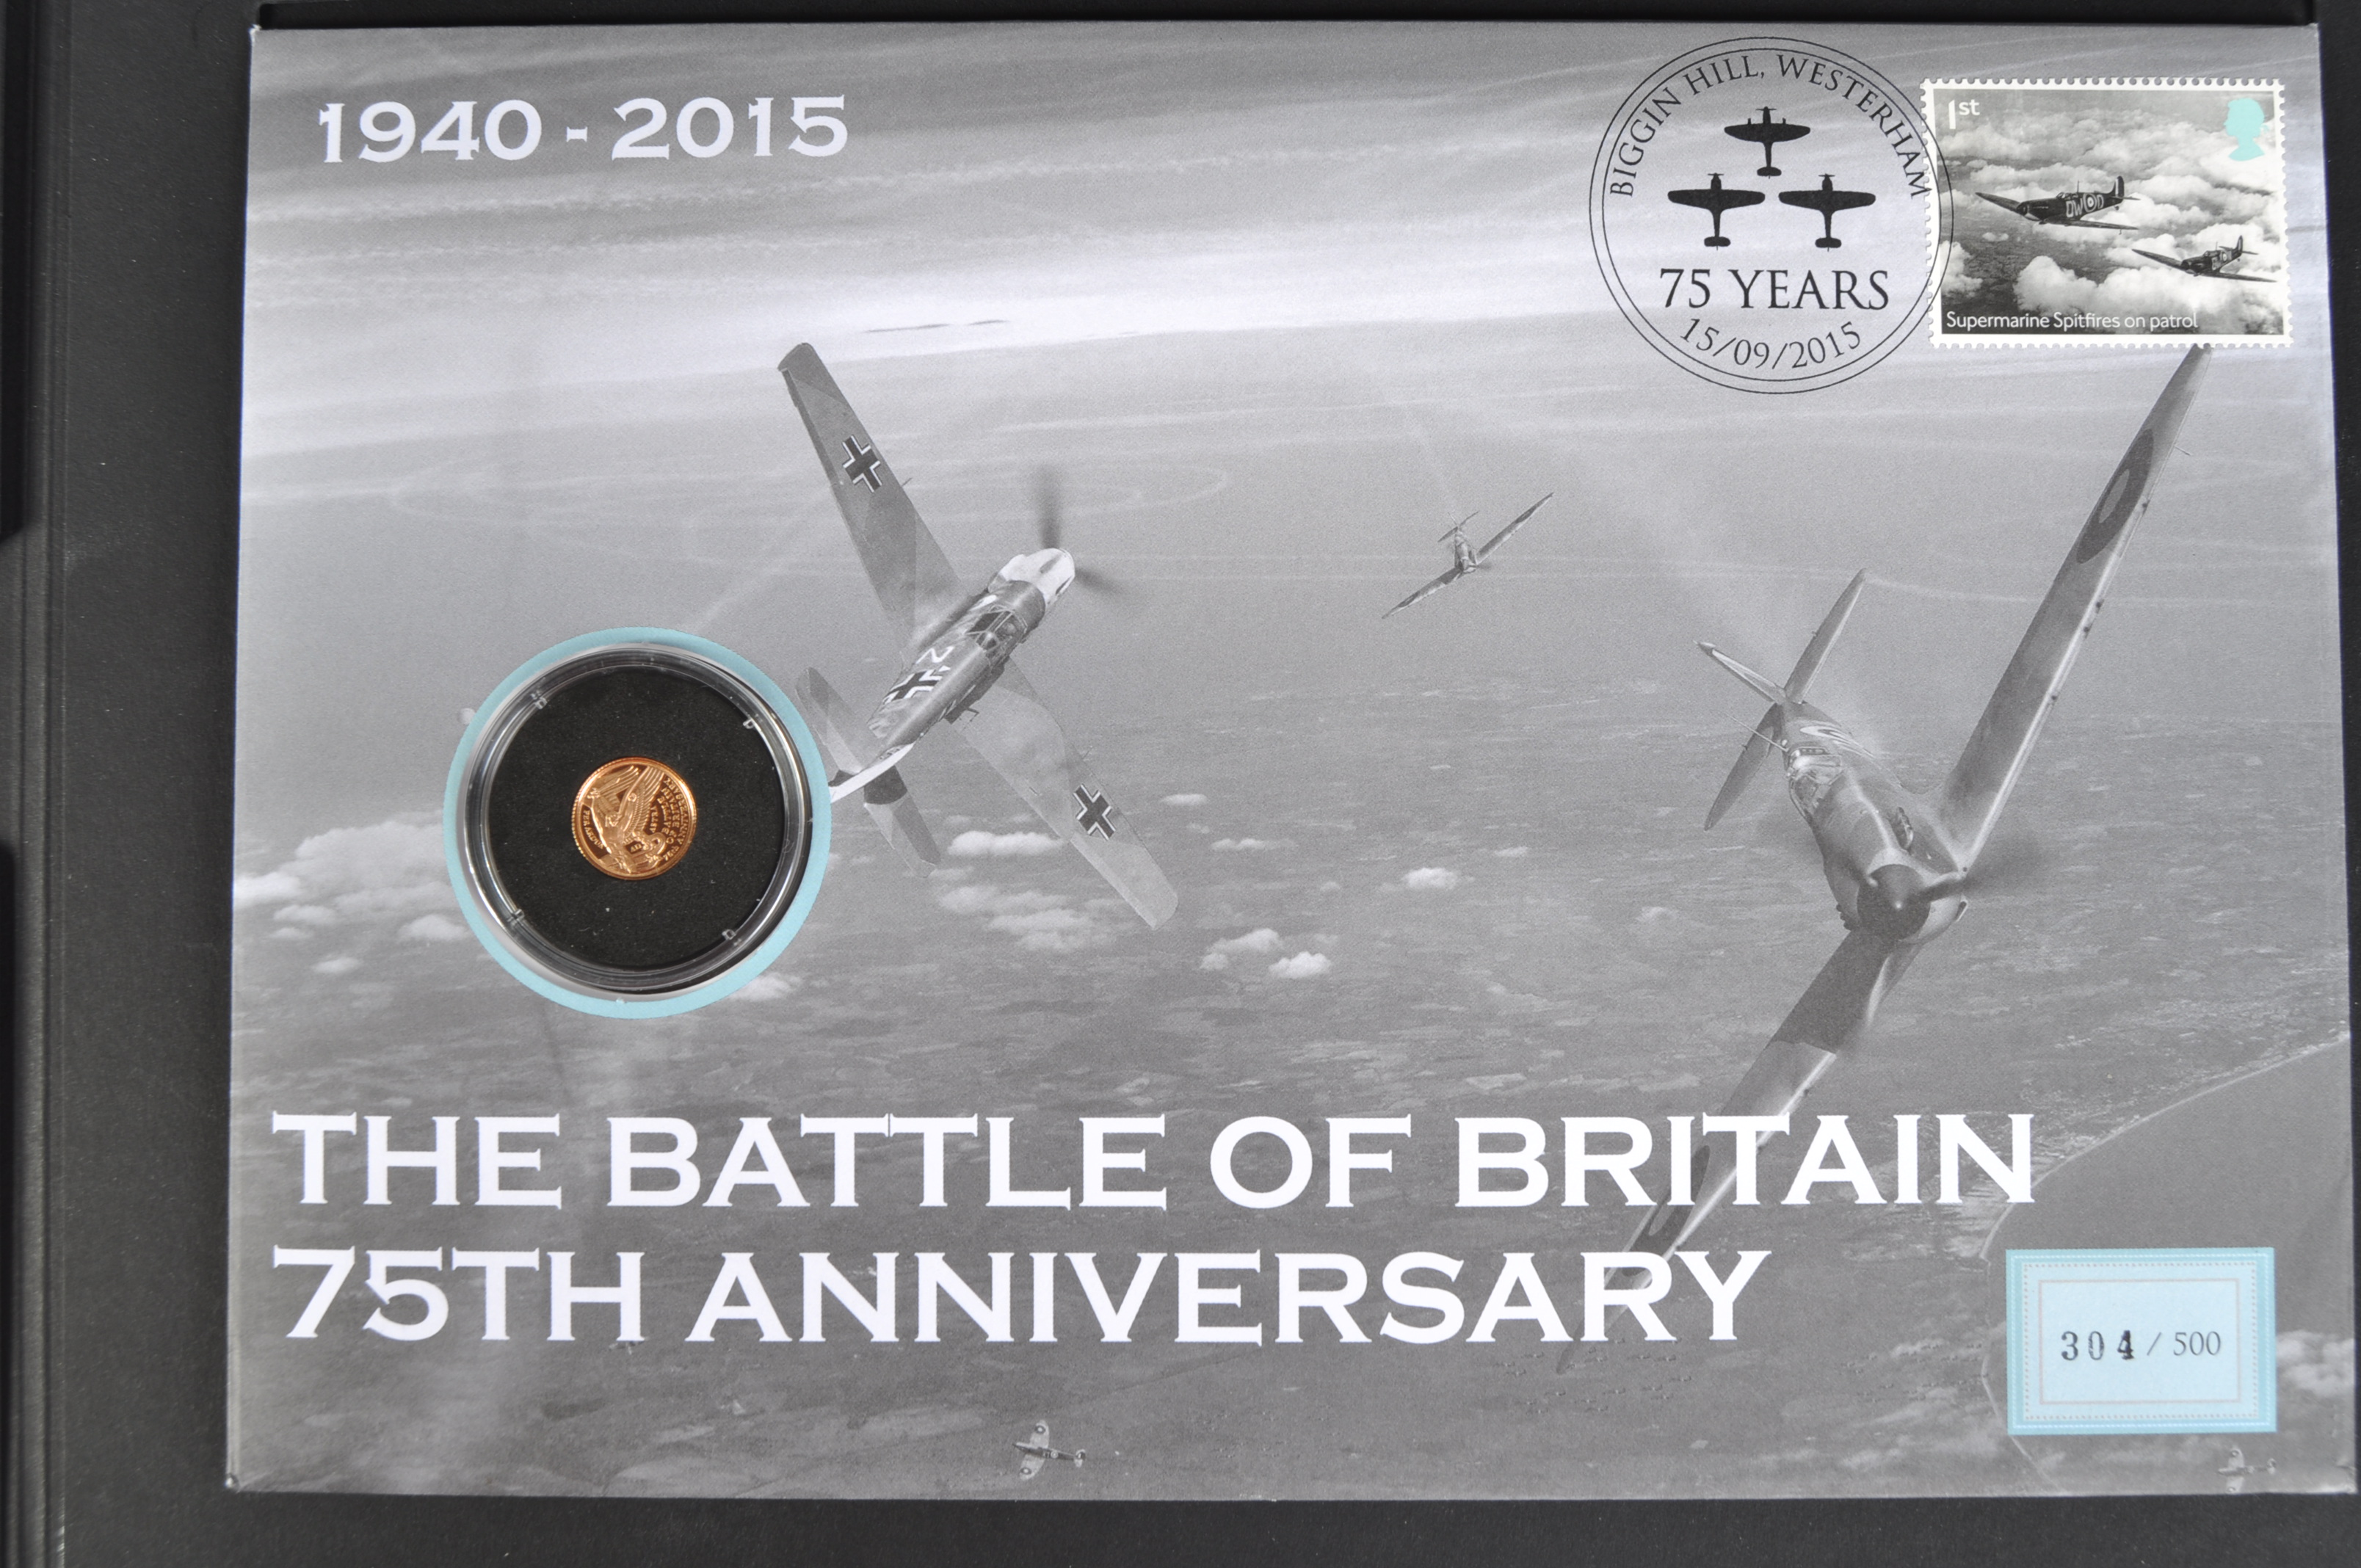 COINS / STAMPS - BATTLE OF BRITAIN 75TH ANNIVERSARY SOVEREIGN COVER - Image 5 of 5